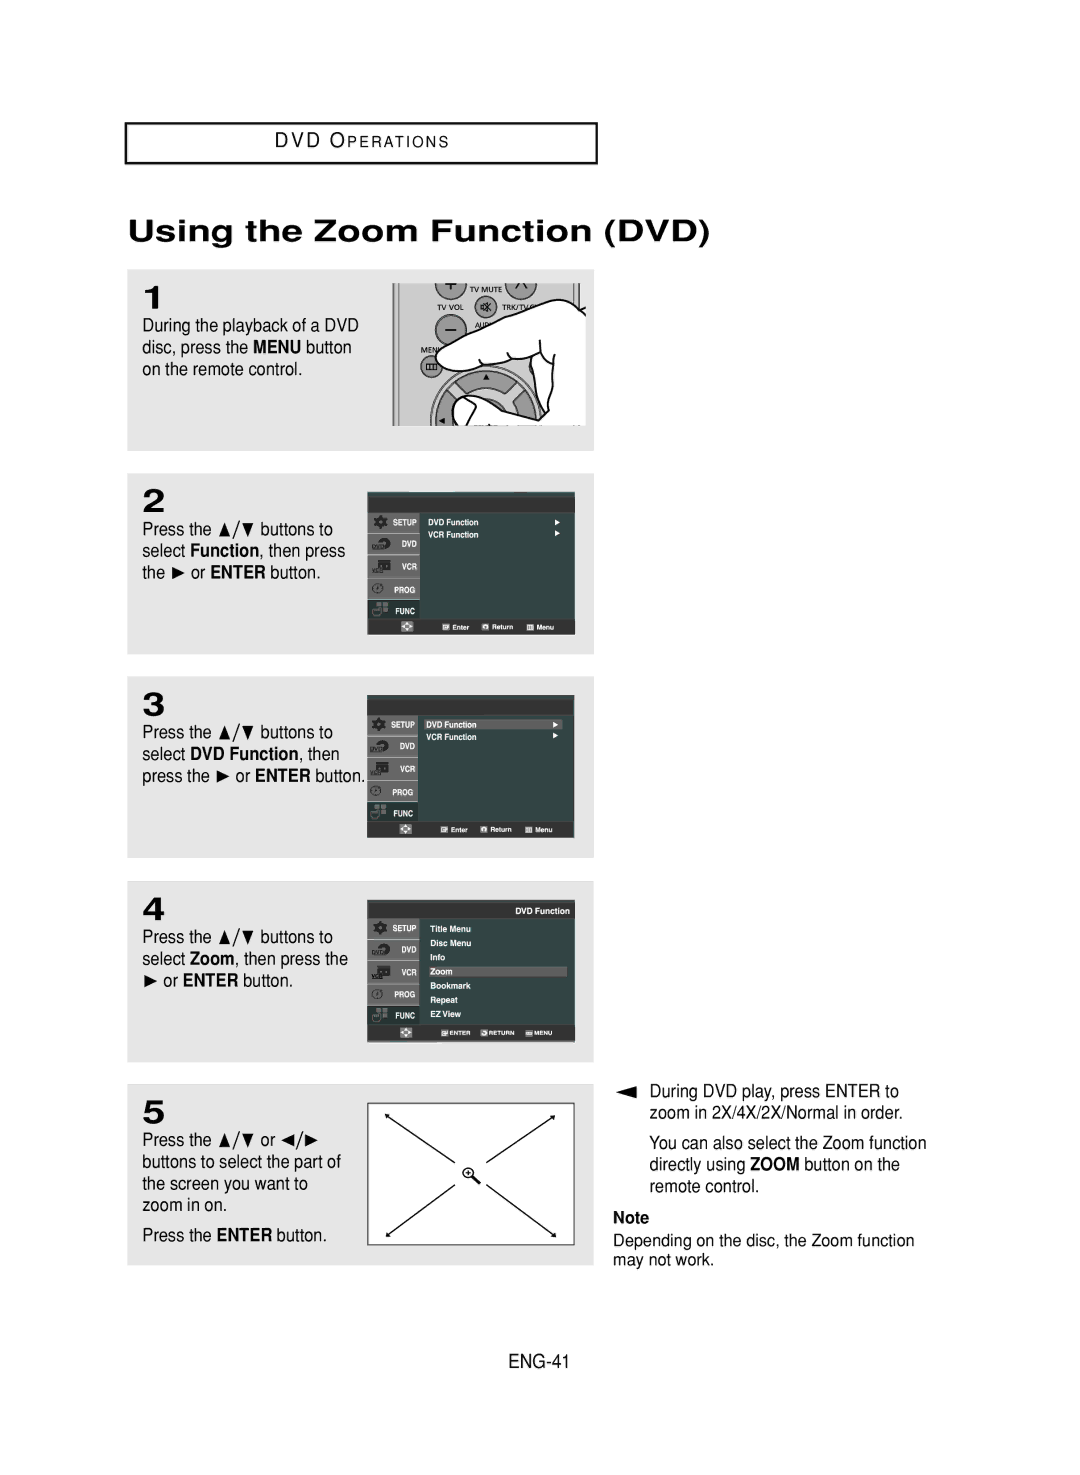 Samsung DVD-V9800 instruction manual Using the Zoom Function DVD, ENG-41 